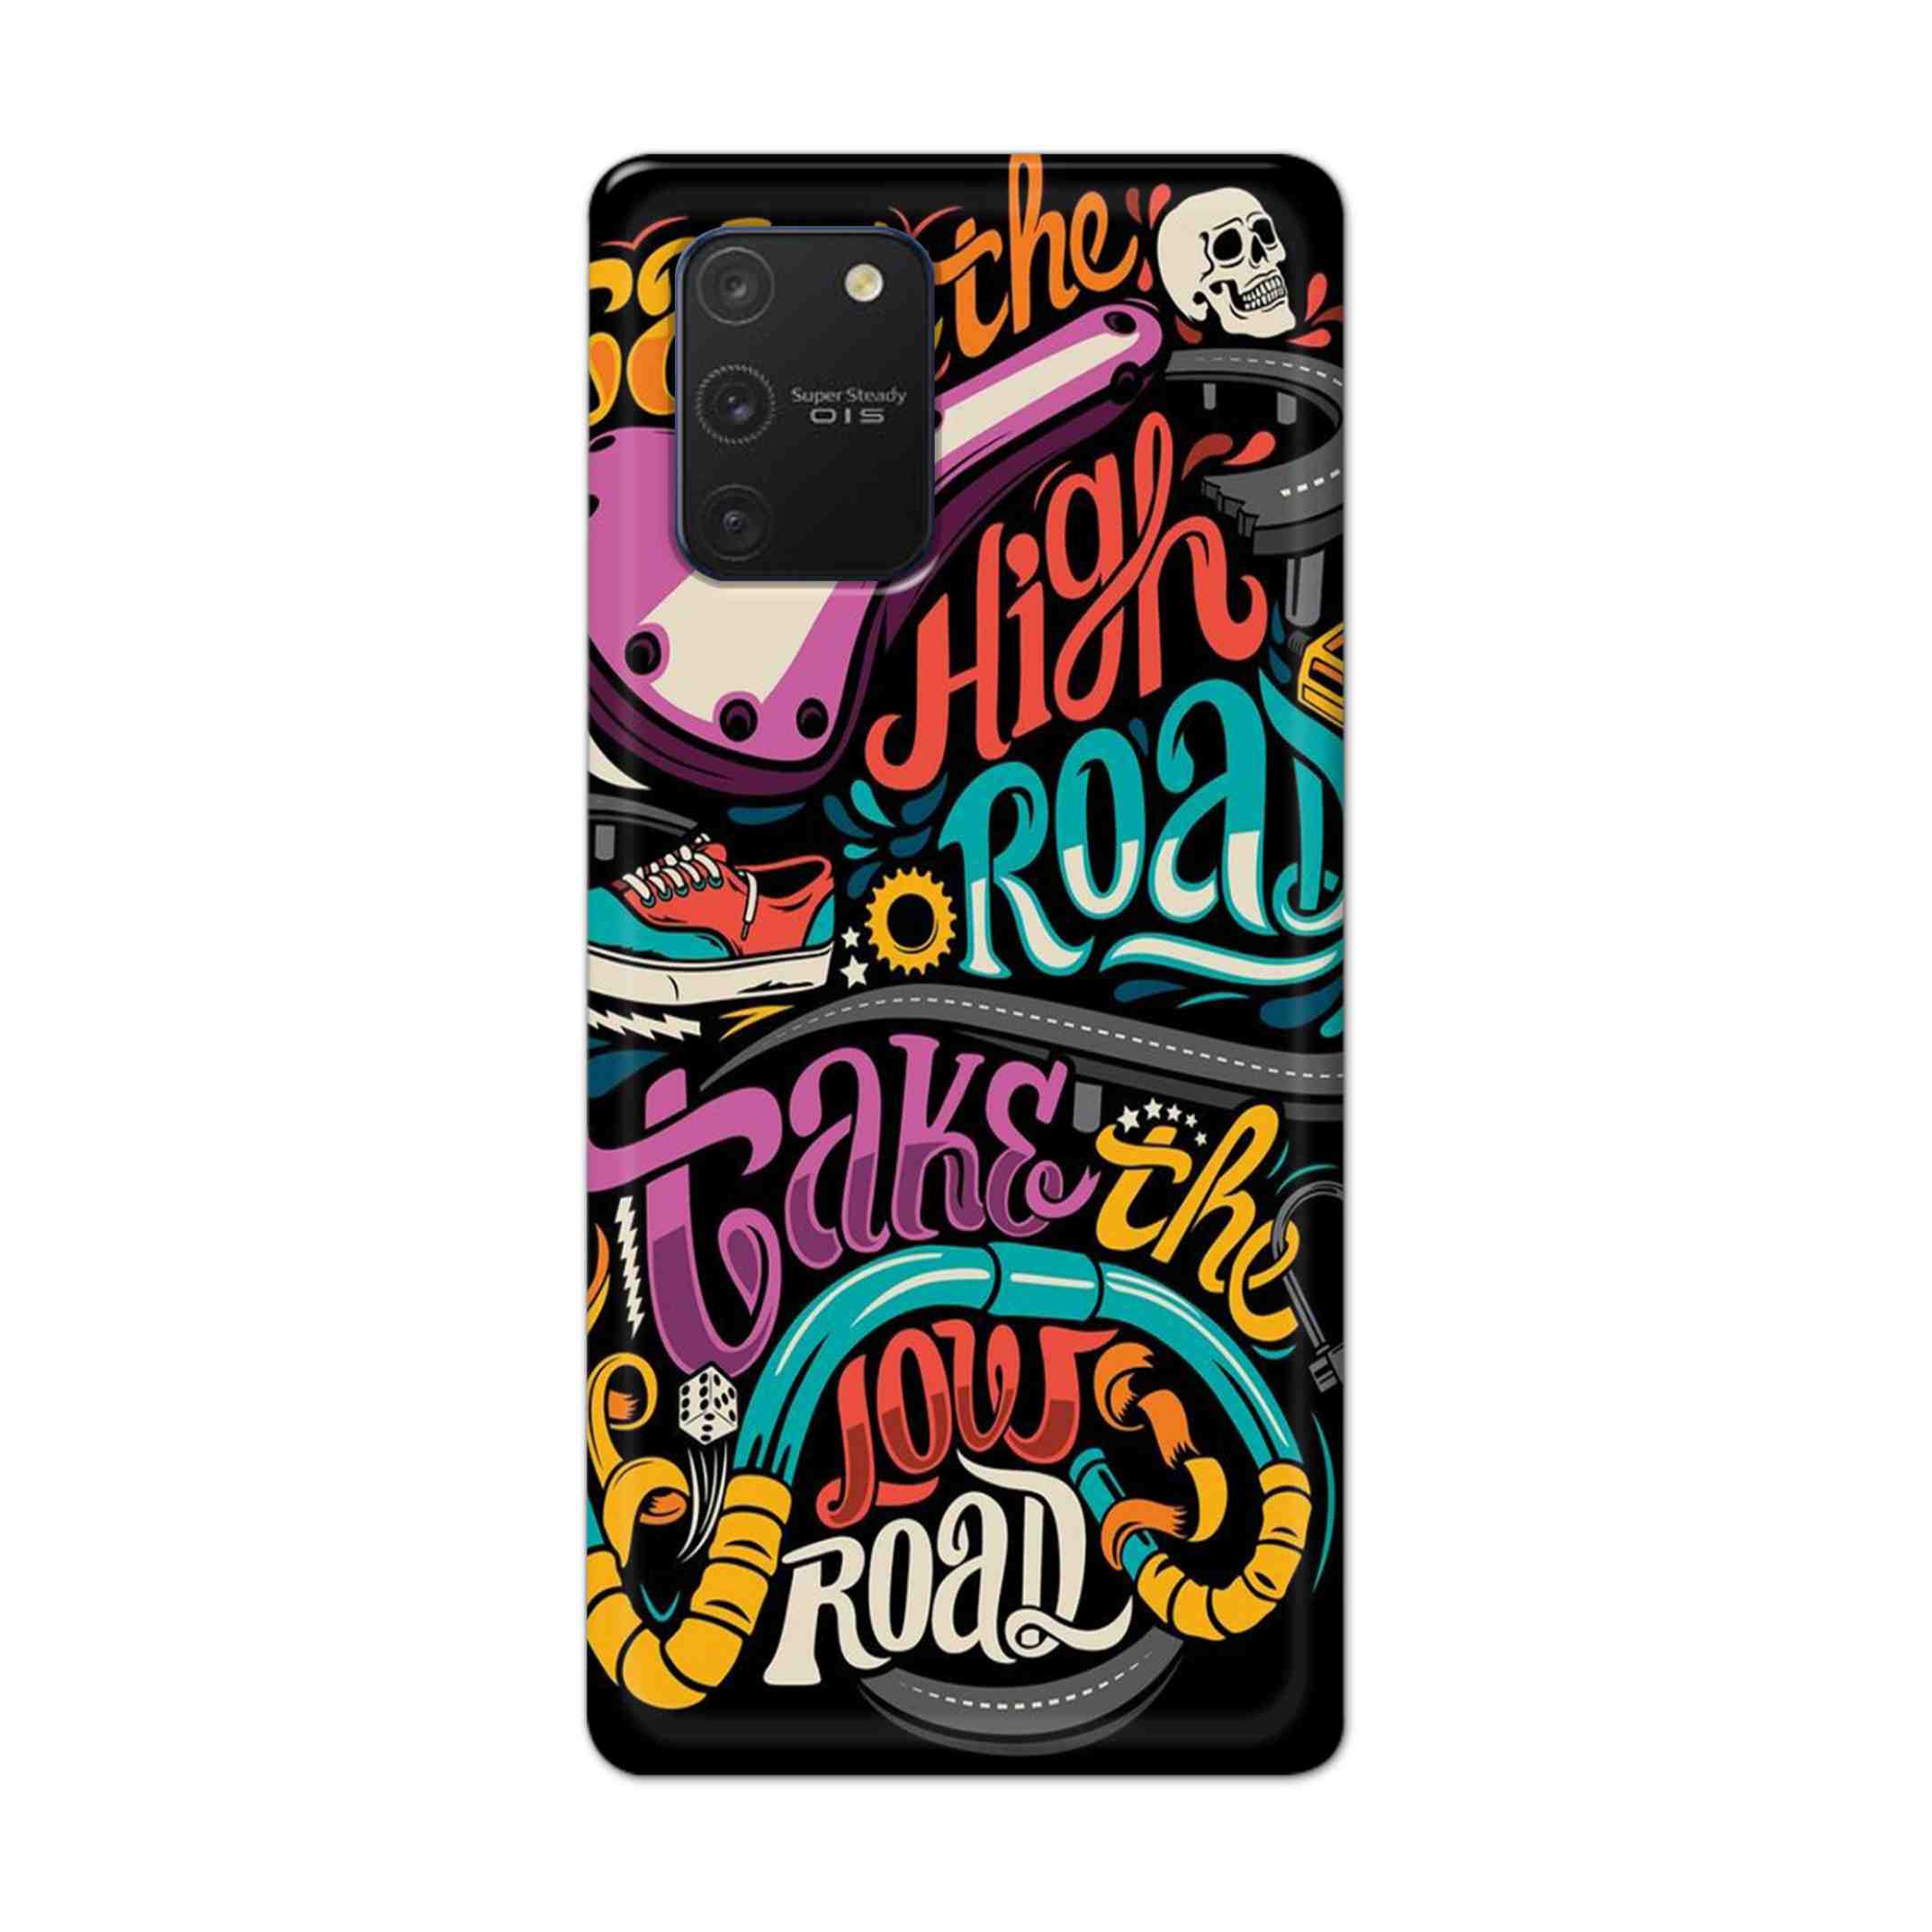 Buy Take The High Road Hard Back Mobile Phone Case Cover For Samsung Galaxy Note 10 Lite (NEW) Online